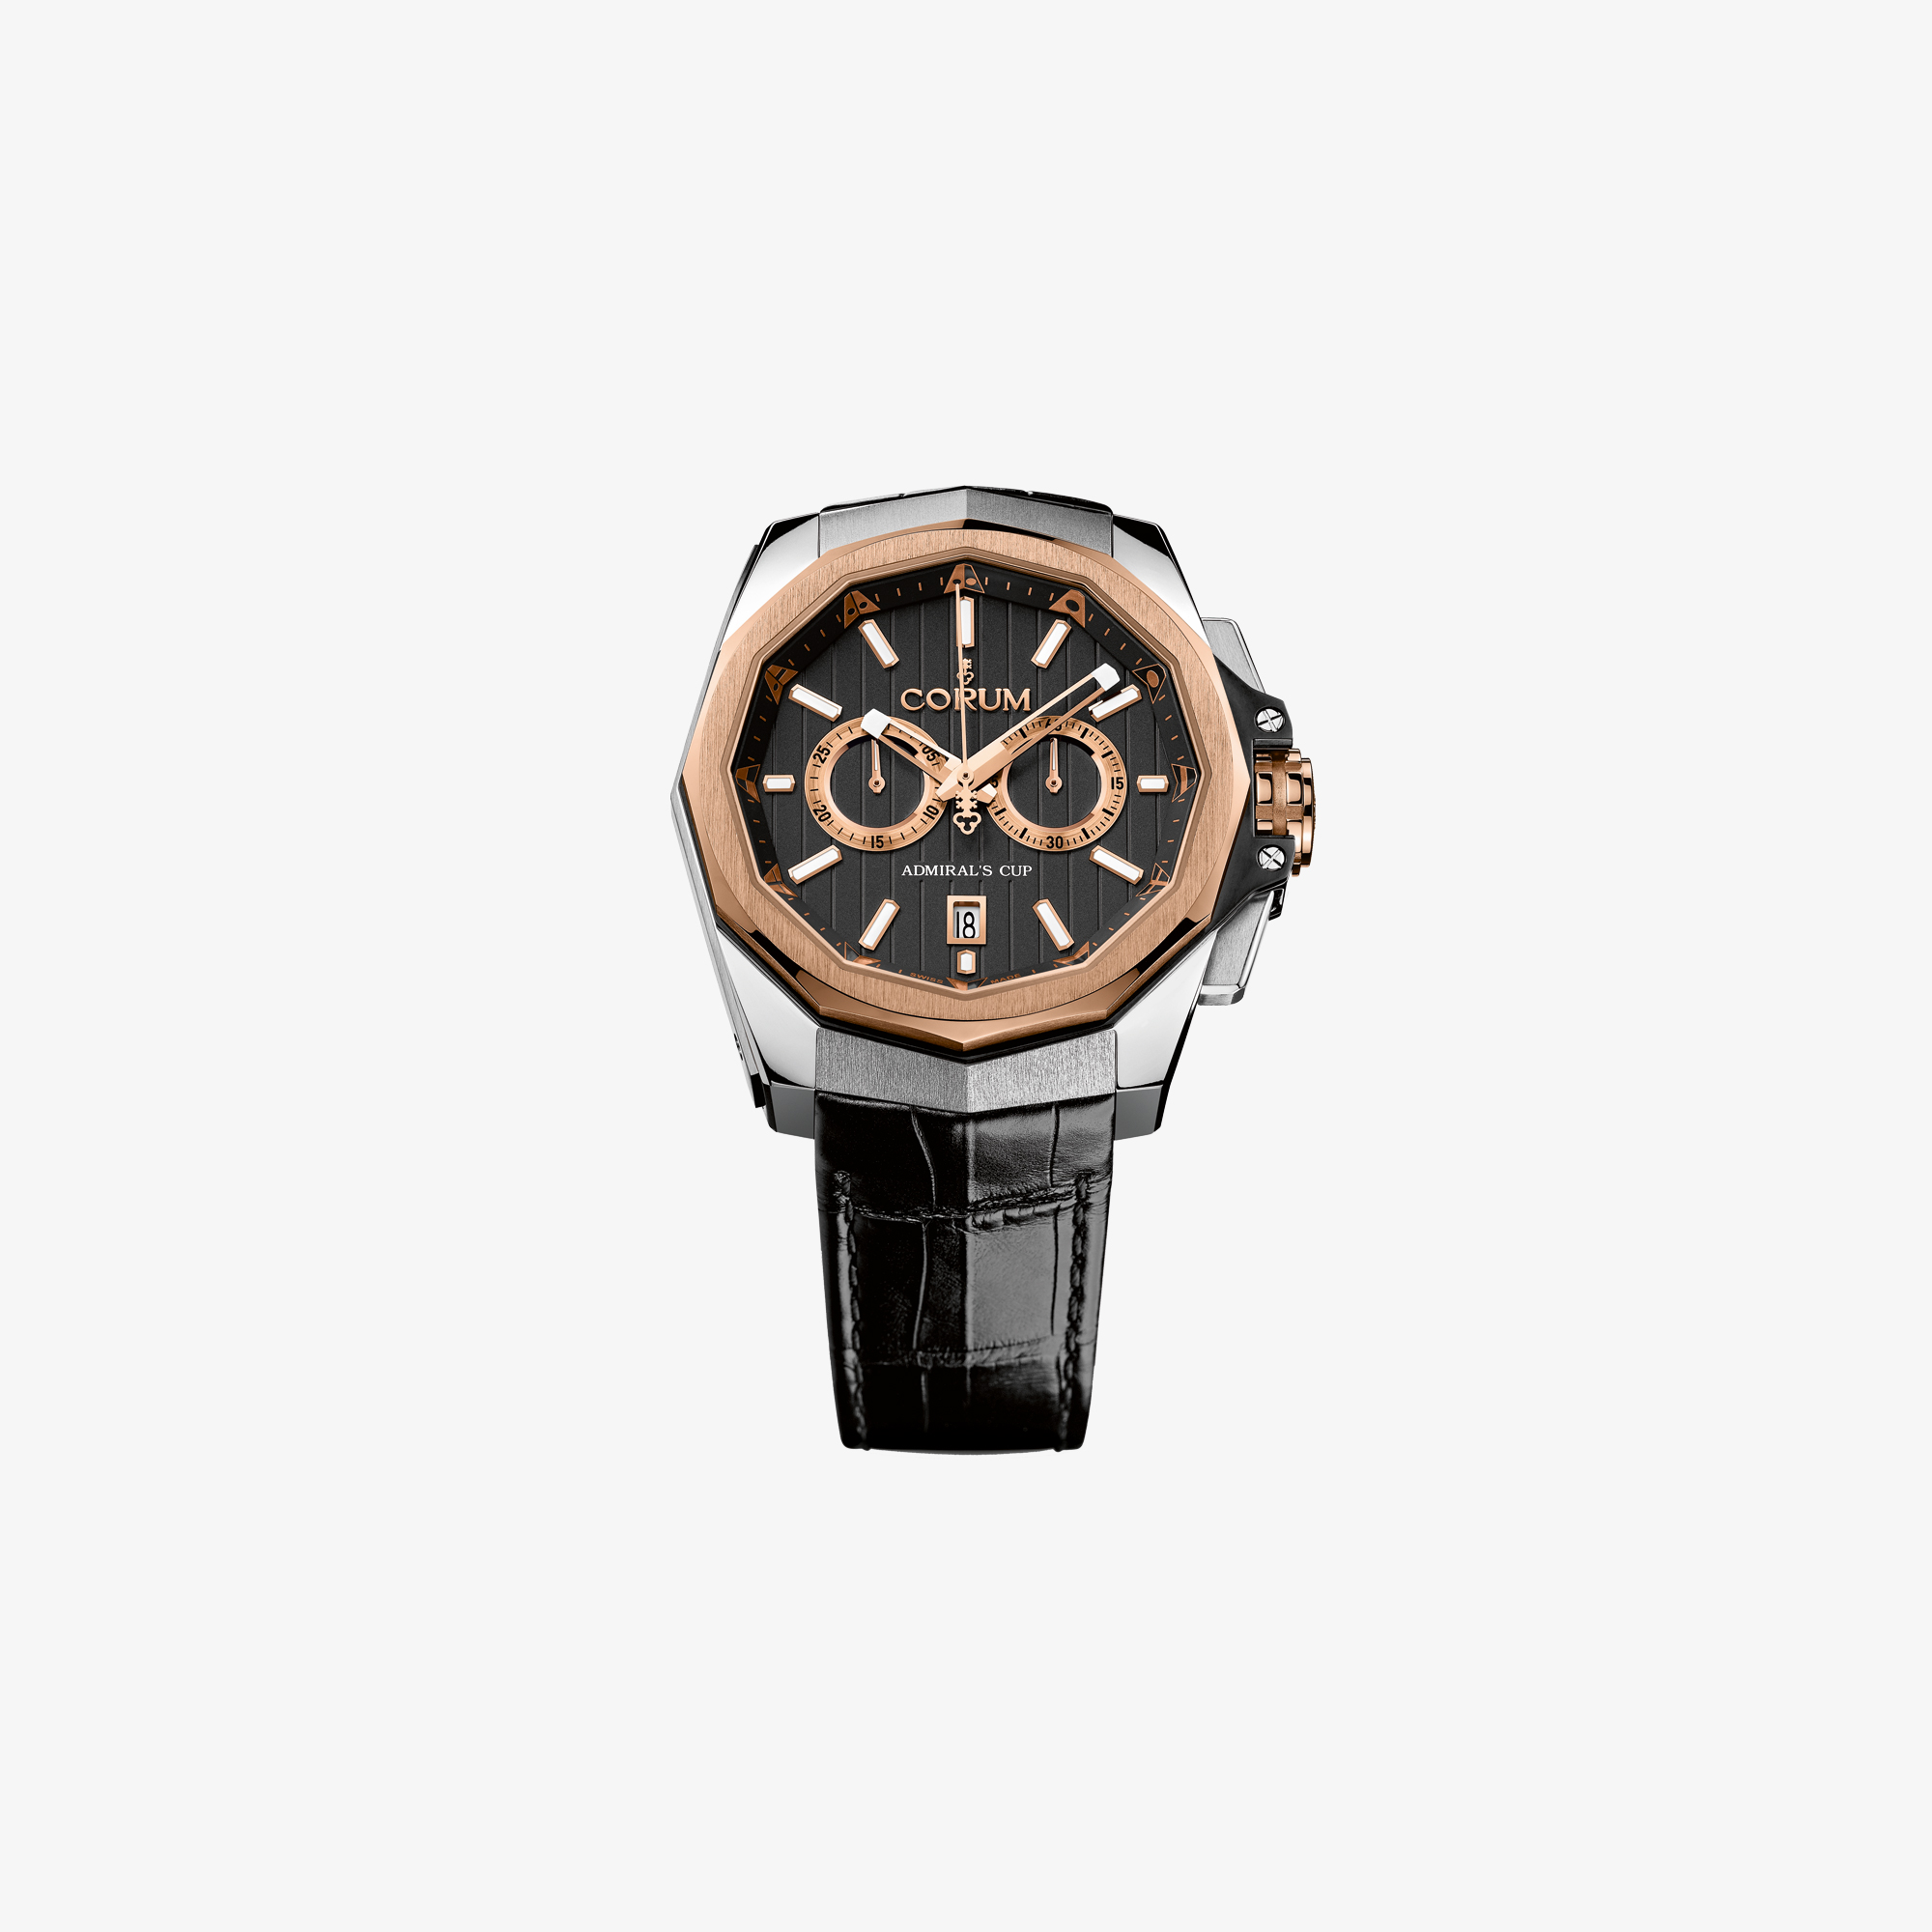 CORUM ADMIRALS CUP AC ONE 45MM BLACK CHRONOGRAPH WITH PINK GOLD BEZEL